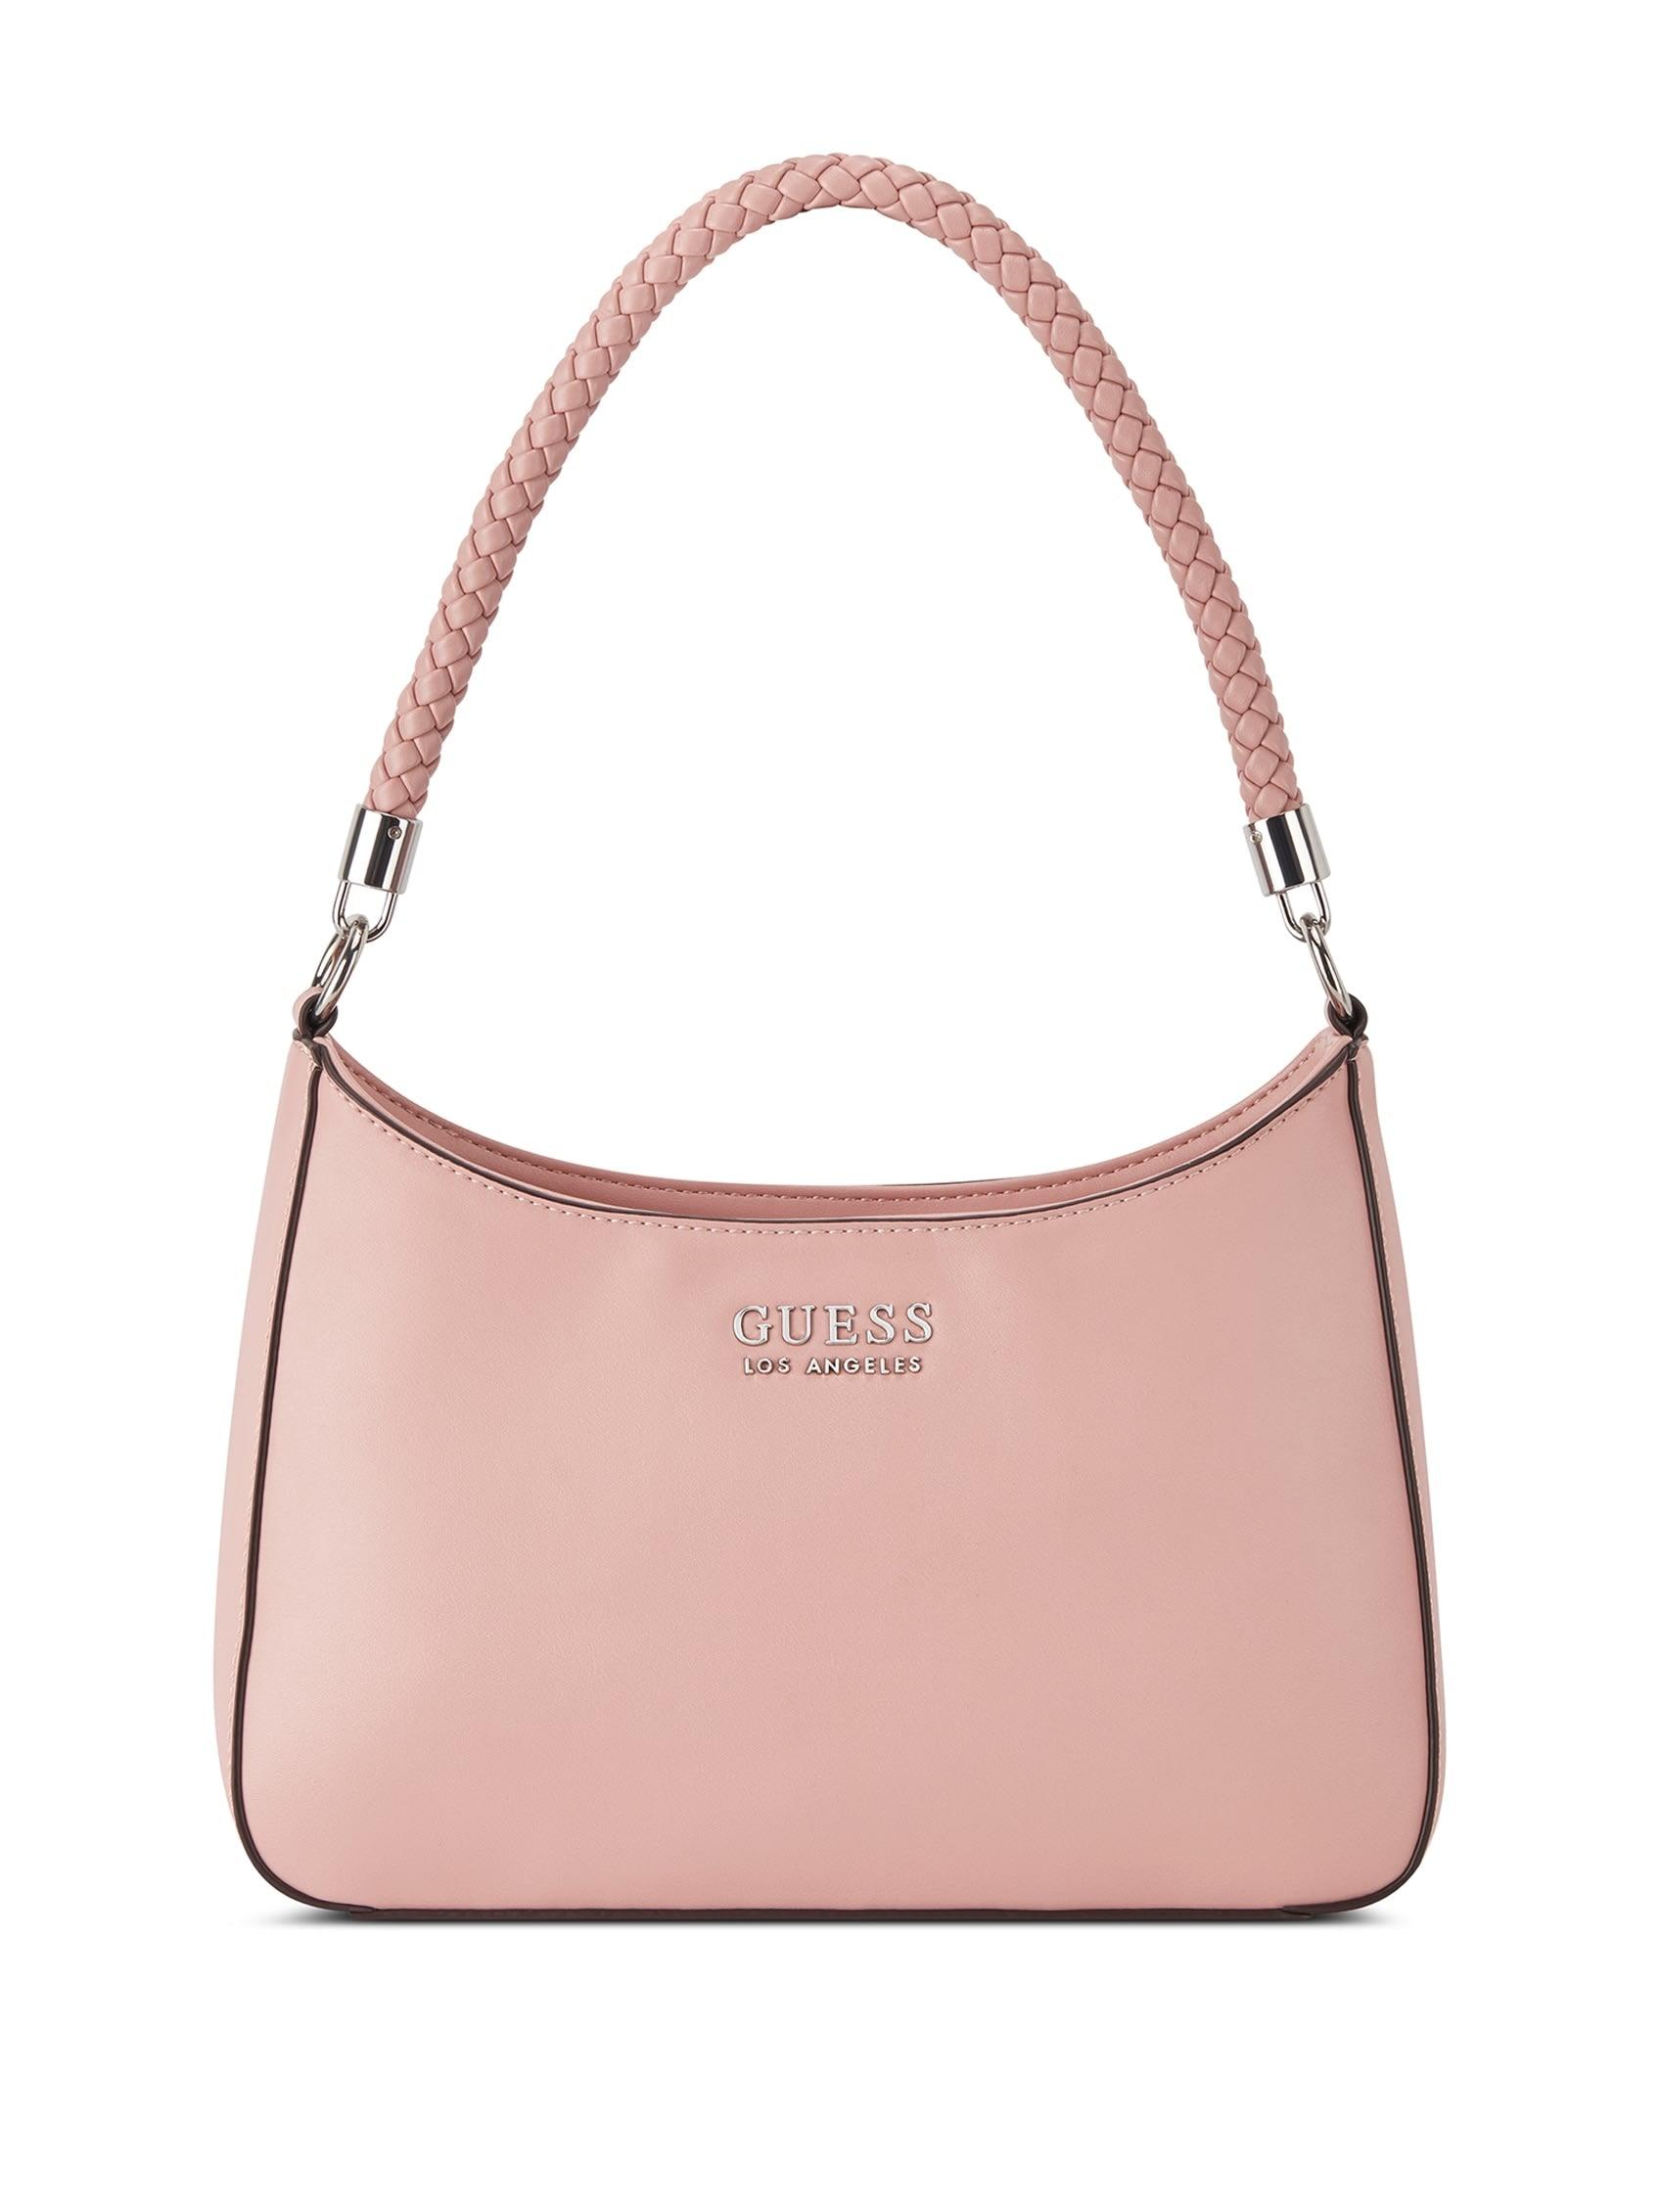 Guess Factory Curtin Top-zip Shoulder Bag in Pink | Lyst